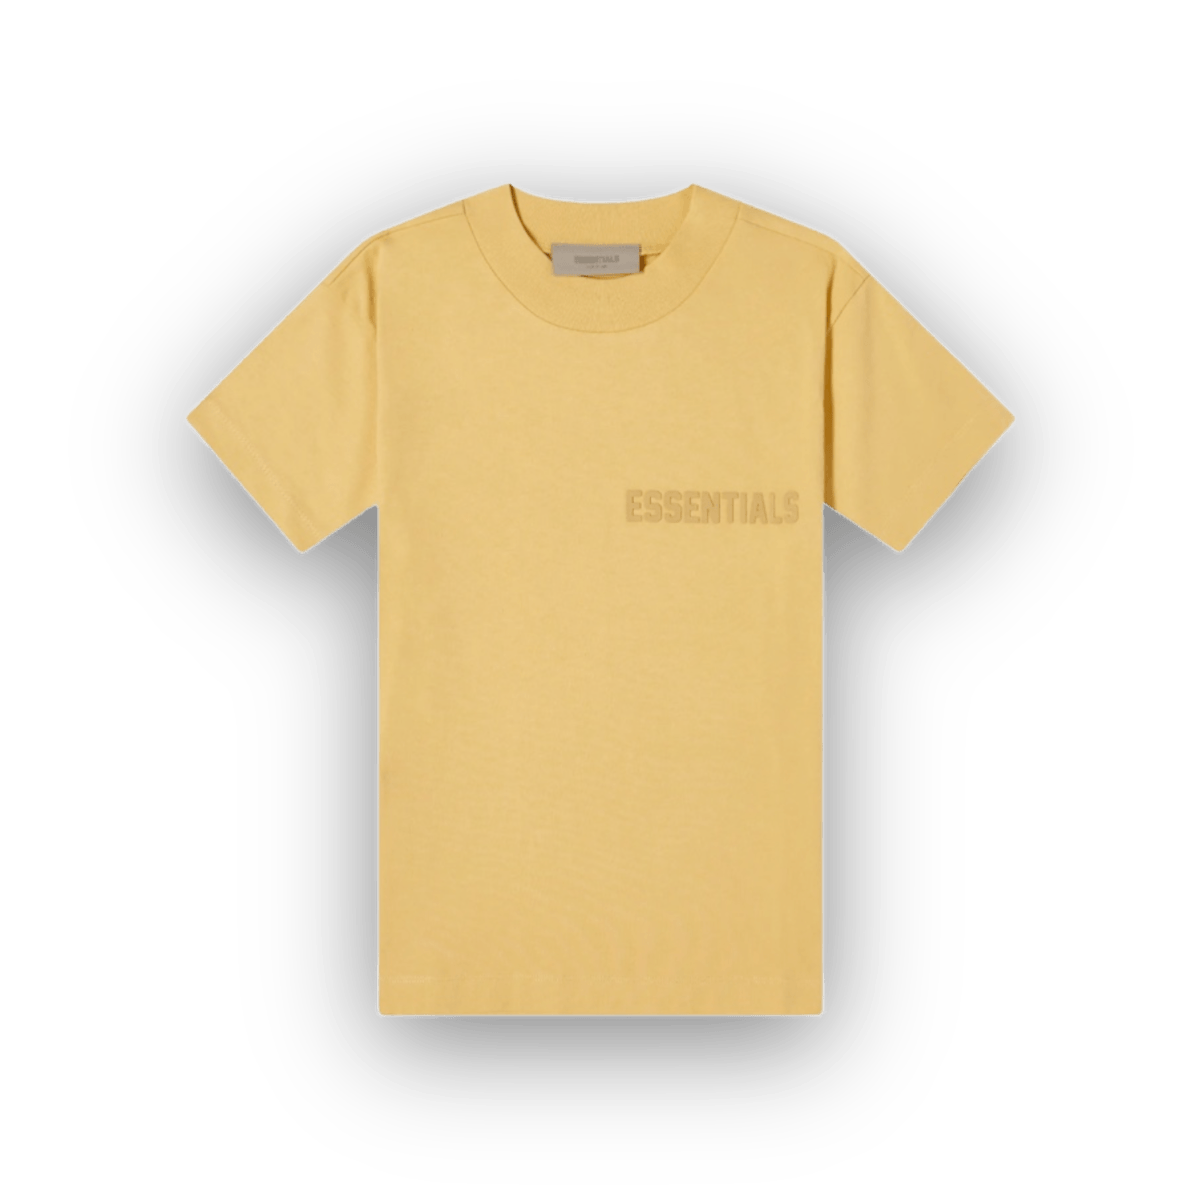 Essentials Fear of God T-Shirt - Gold - Long Sleeve - Essentials - Jawns on Fire - sneakers